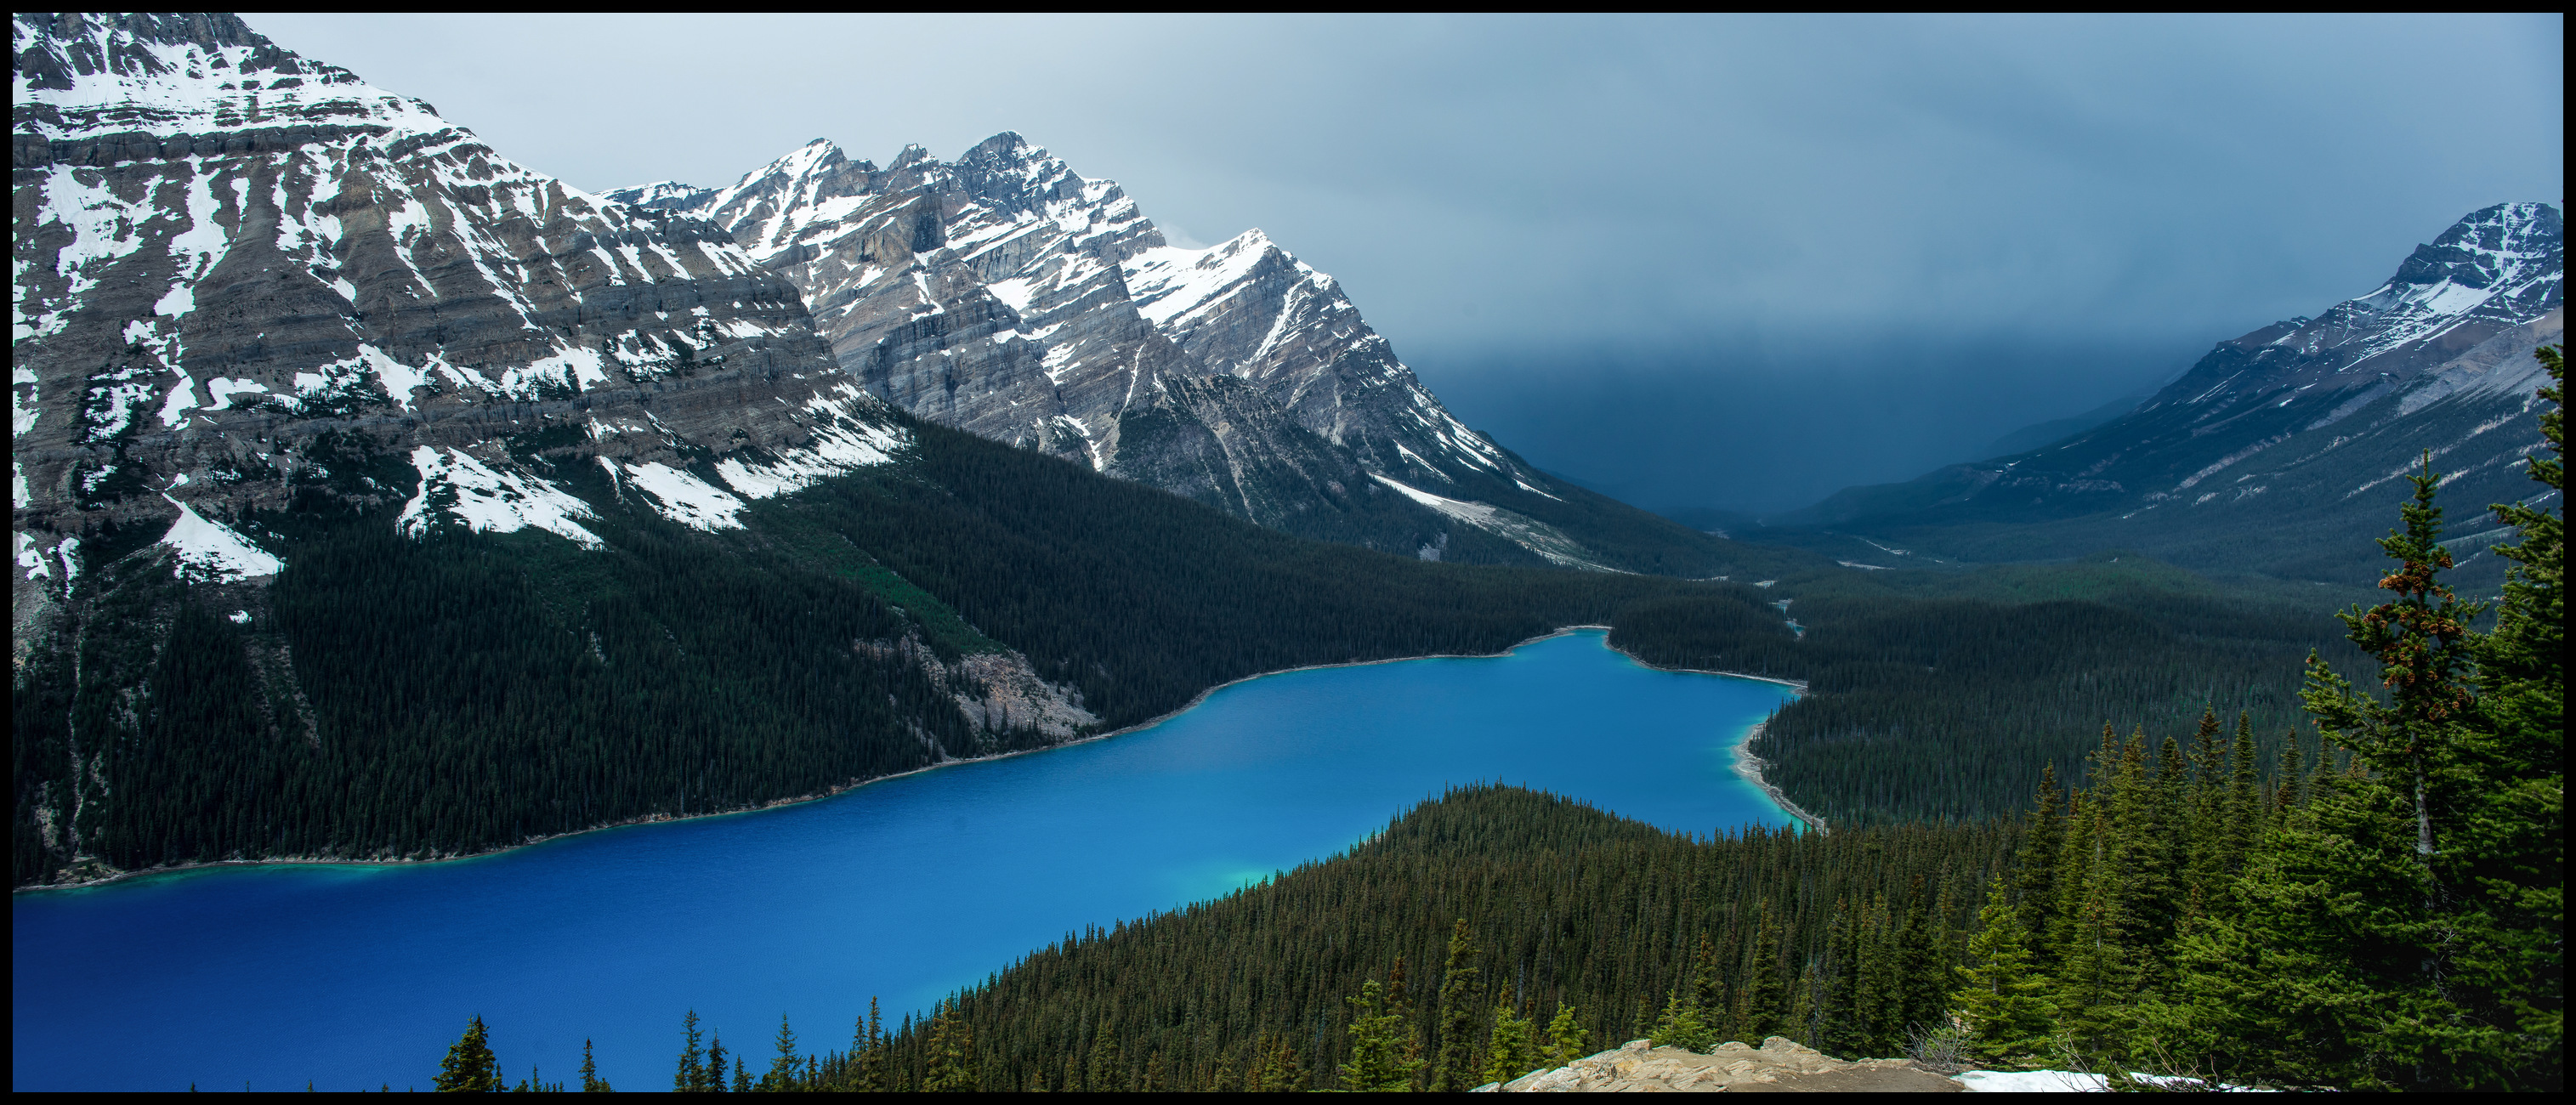 Peyto Lake colours after the storm Sony A7 / Canon FD Tilt Shift 35 2.8